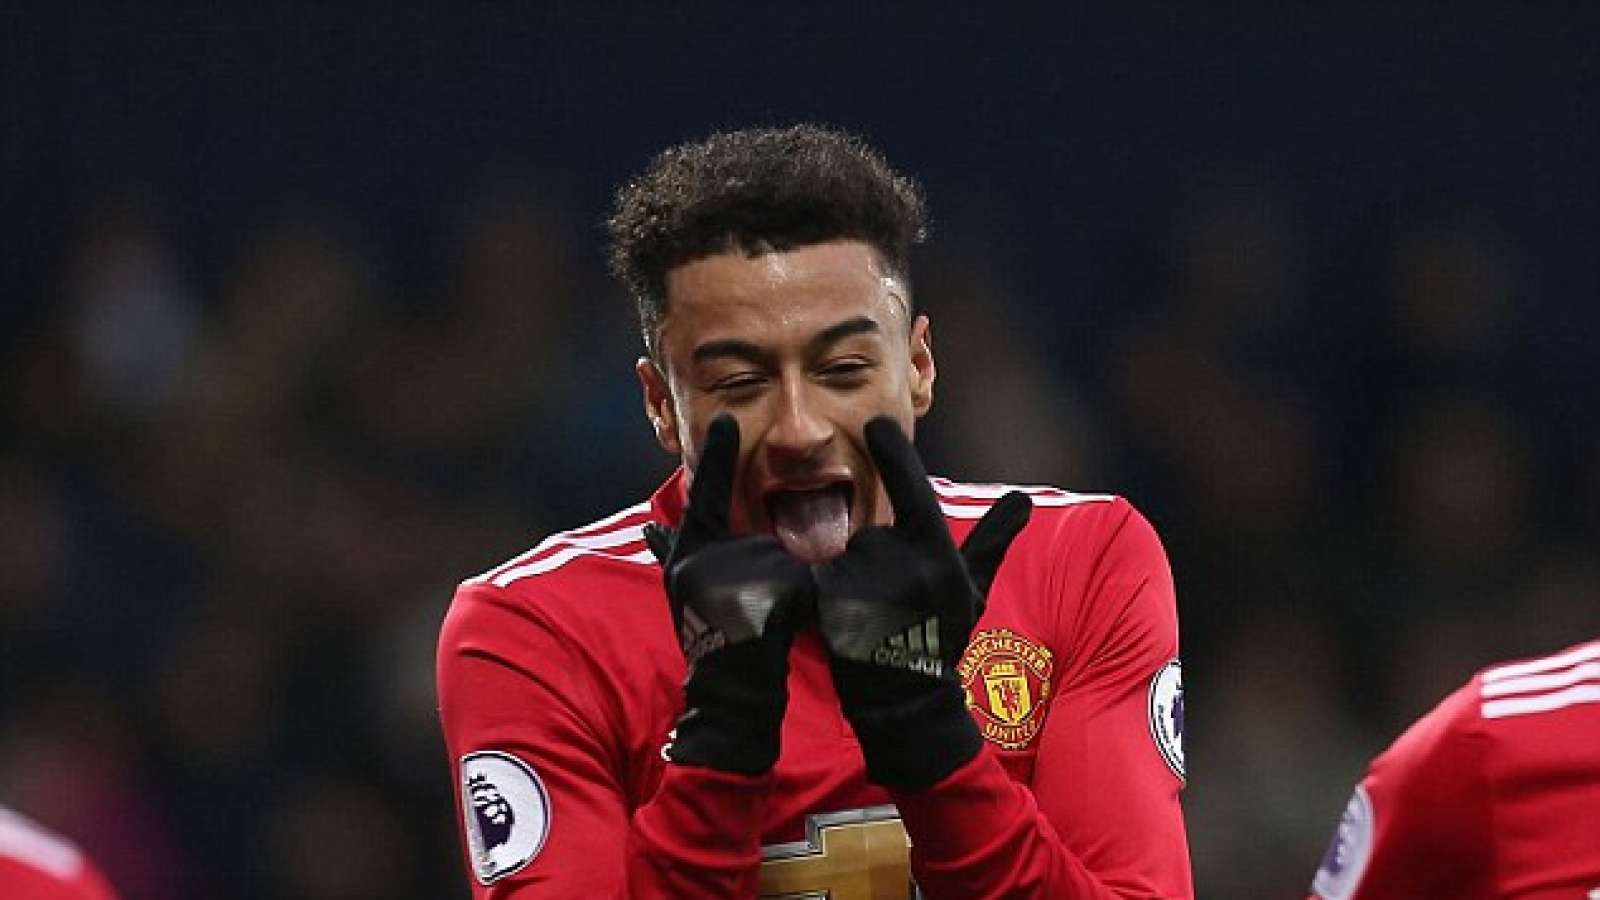 JL spoiled: Jesse Lingard gets gift from girlfriend after Chelsea